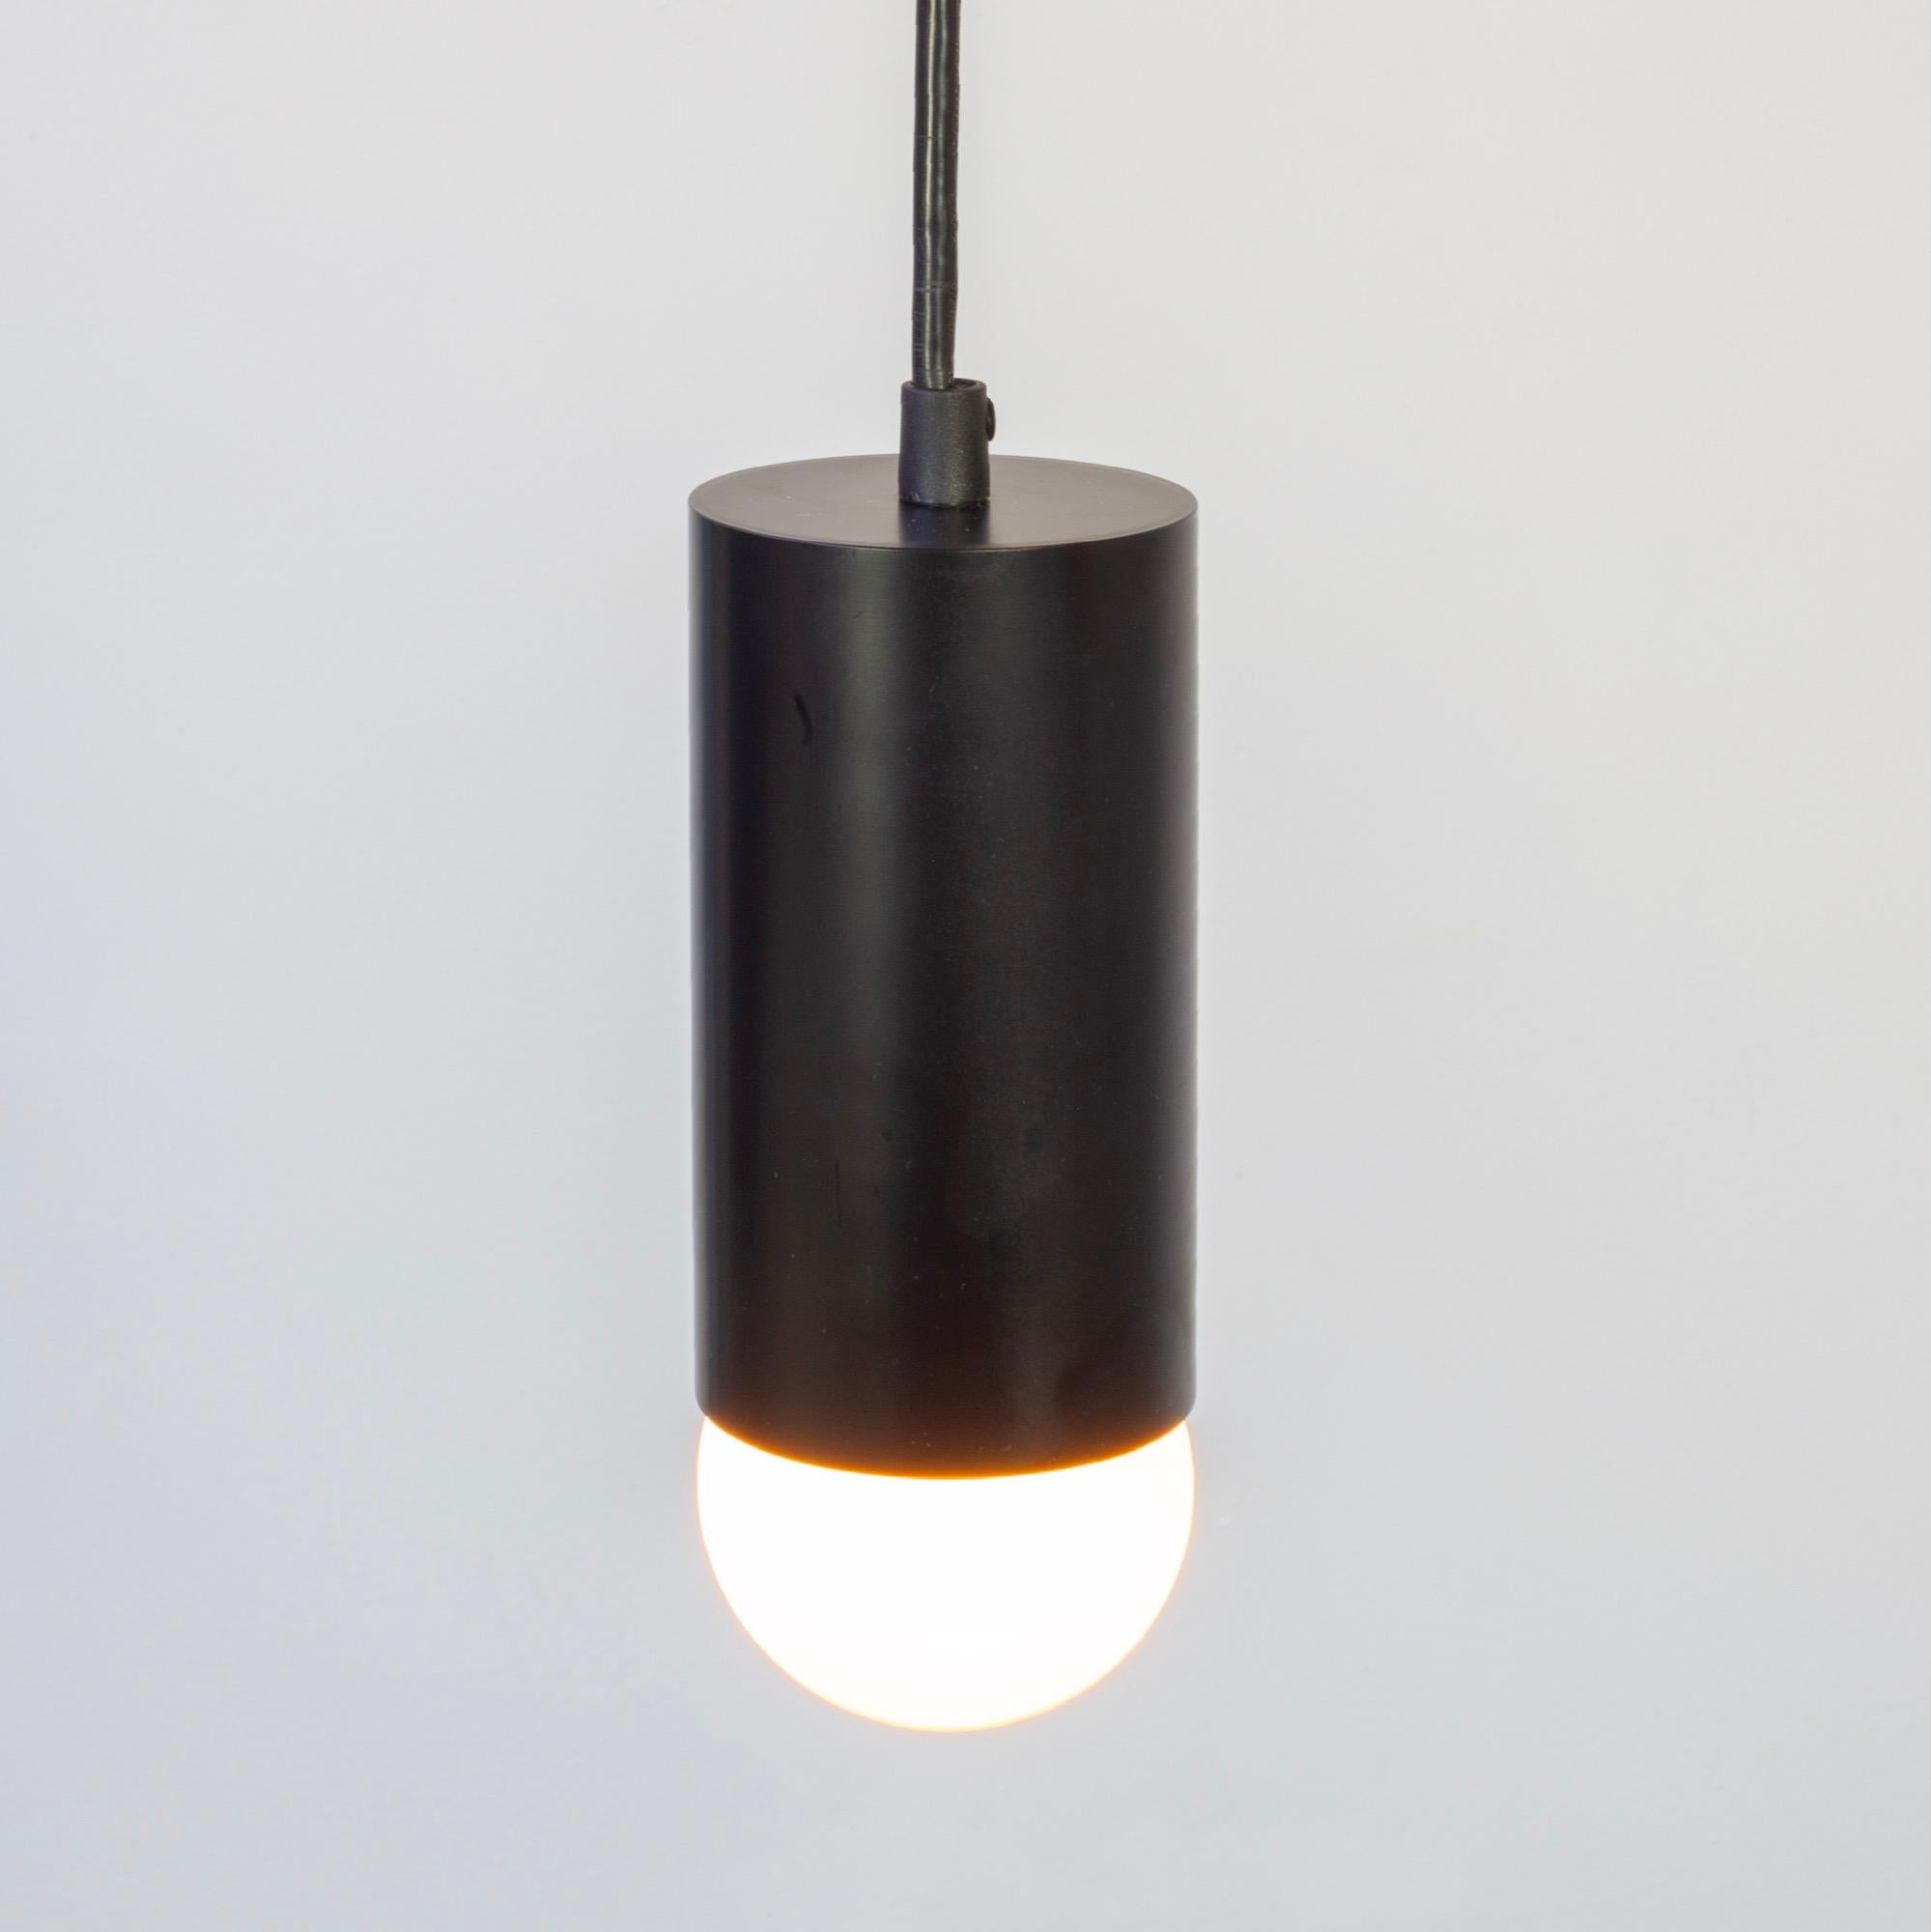 This listing is for 1x deep pendant in black designed and manufactured by Research.Lighting.

Materials: Steel
Finish: Powder Coated Steel in black
Electronics: 1x E26 Socket, G25 Bulb (included)
Suspension: 5